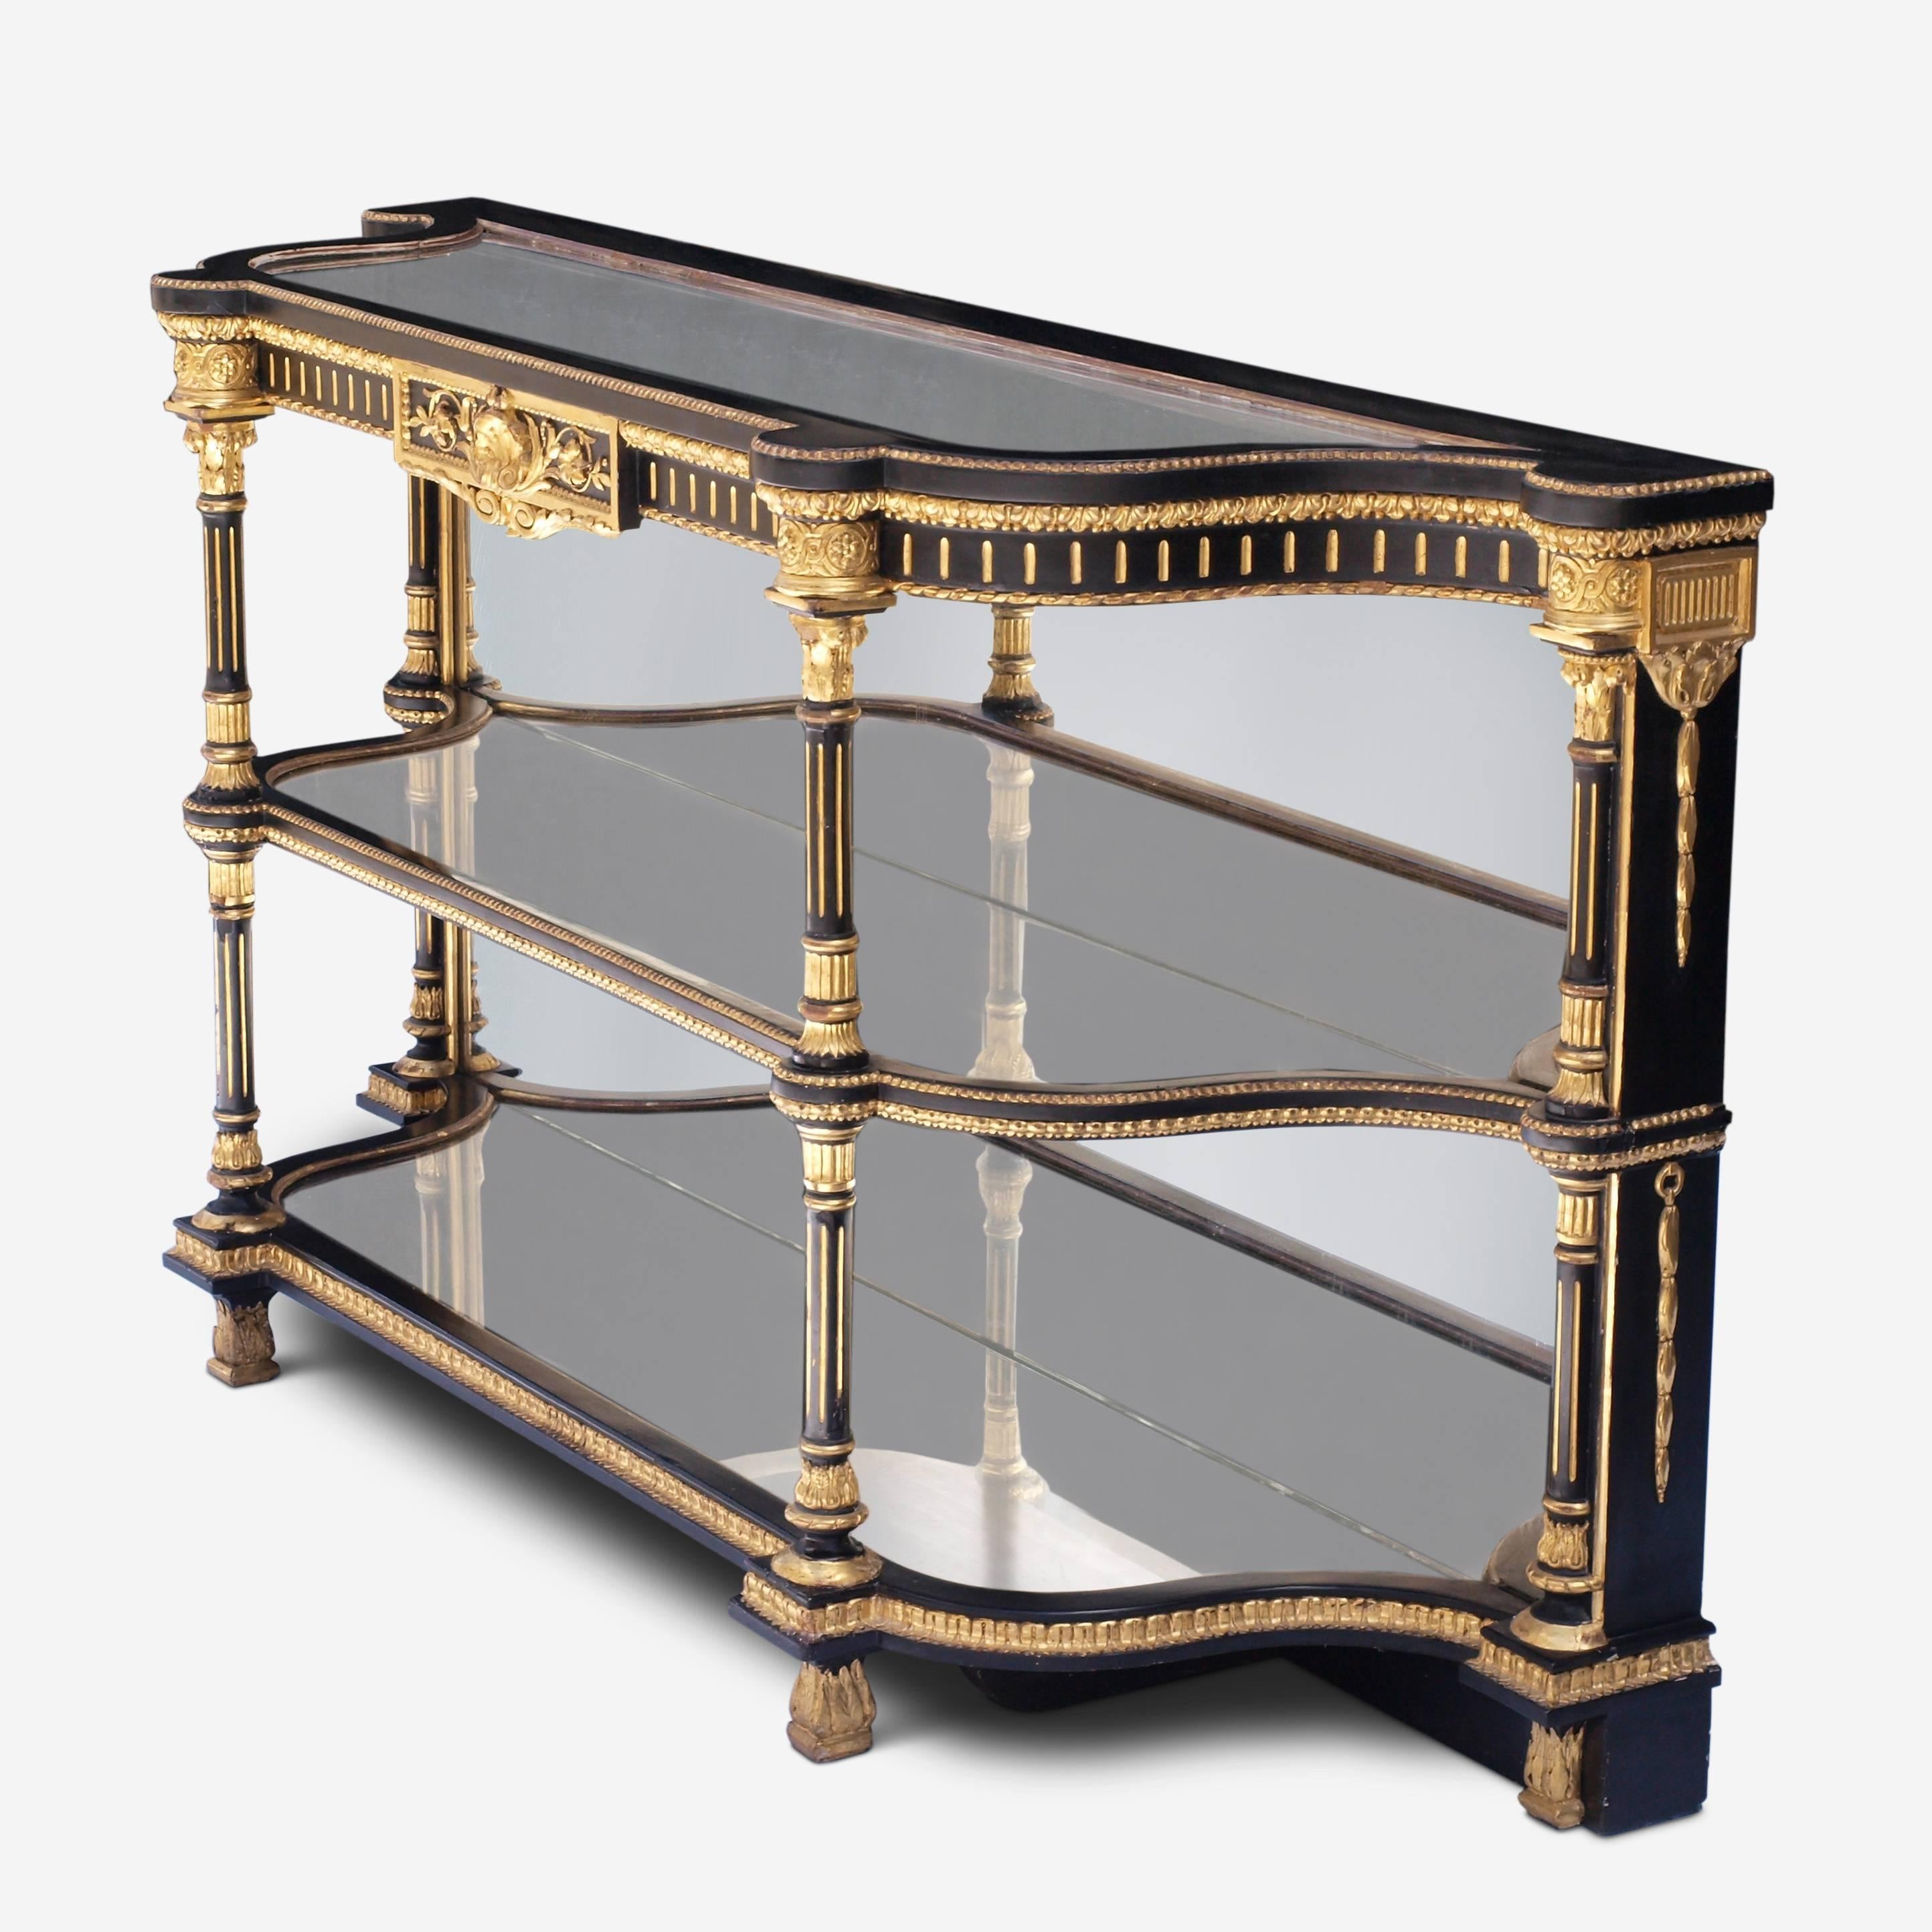 English Ebonized Mirrored and Gilt Cabinet by Charles Nosotti circa 1850